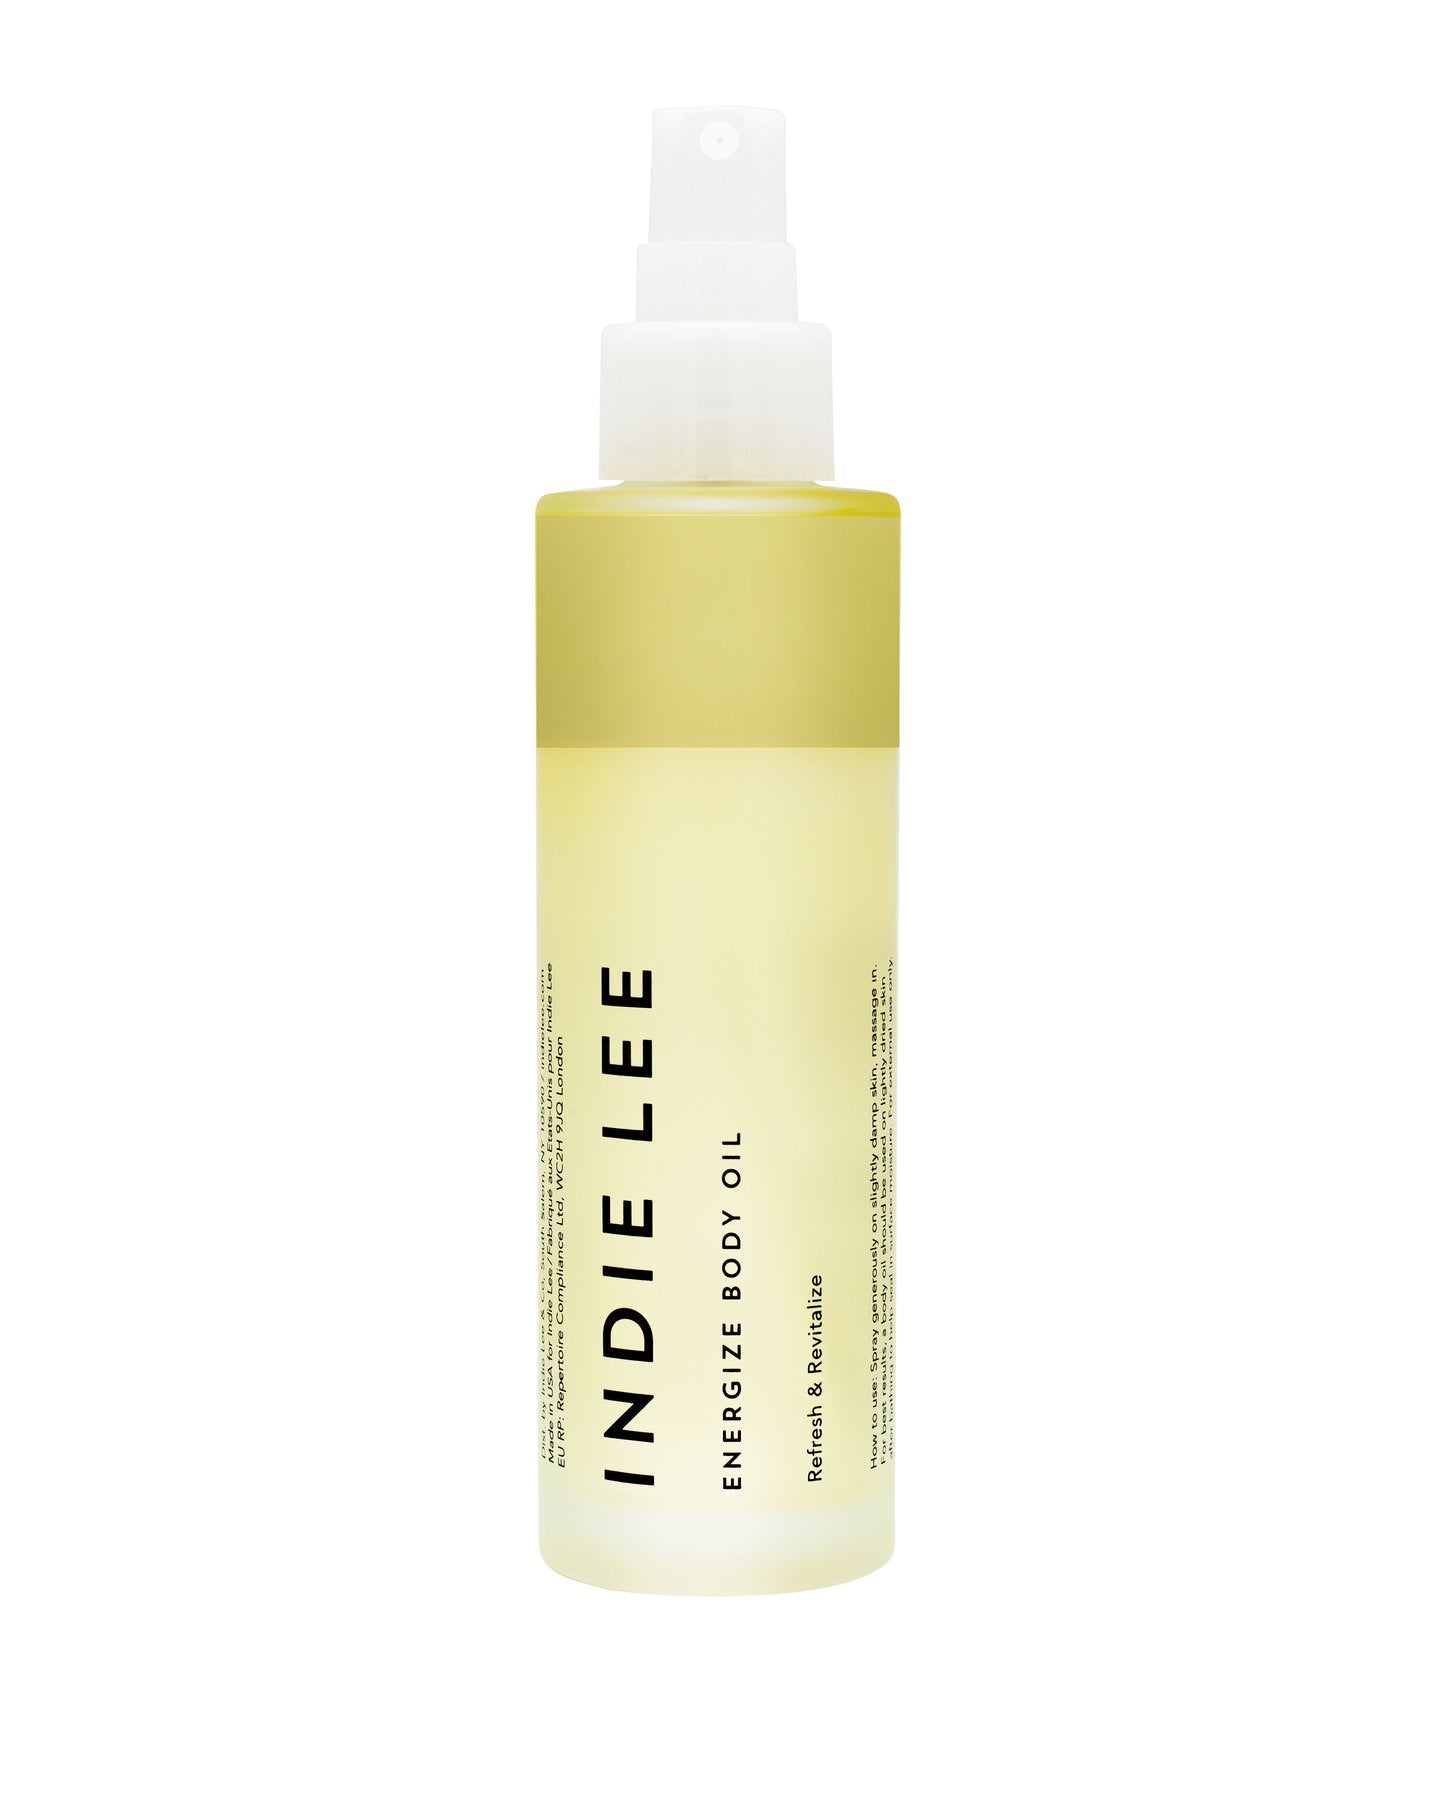 Energize Body Oil by Indie Lee